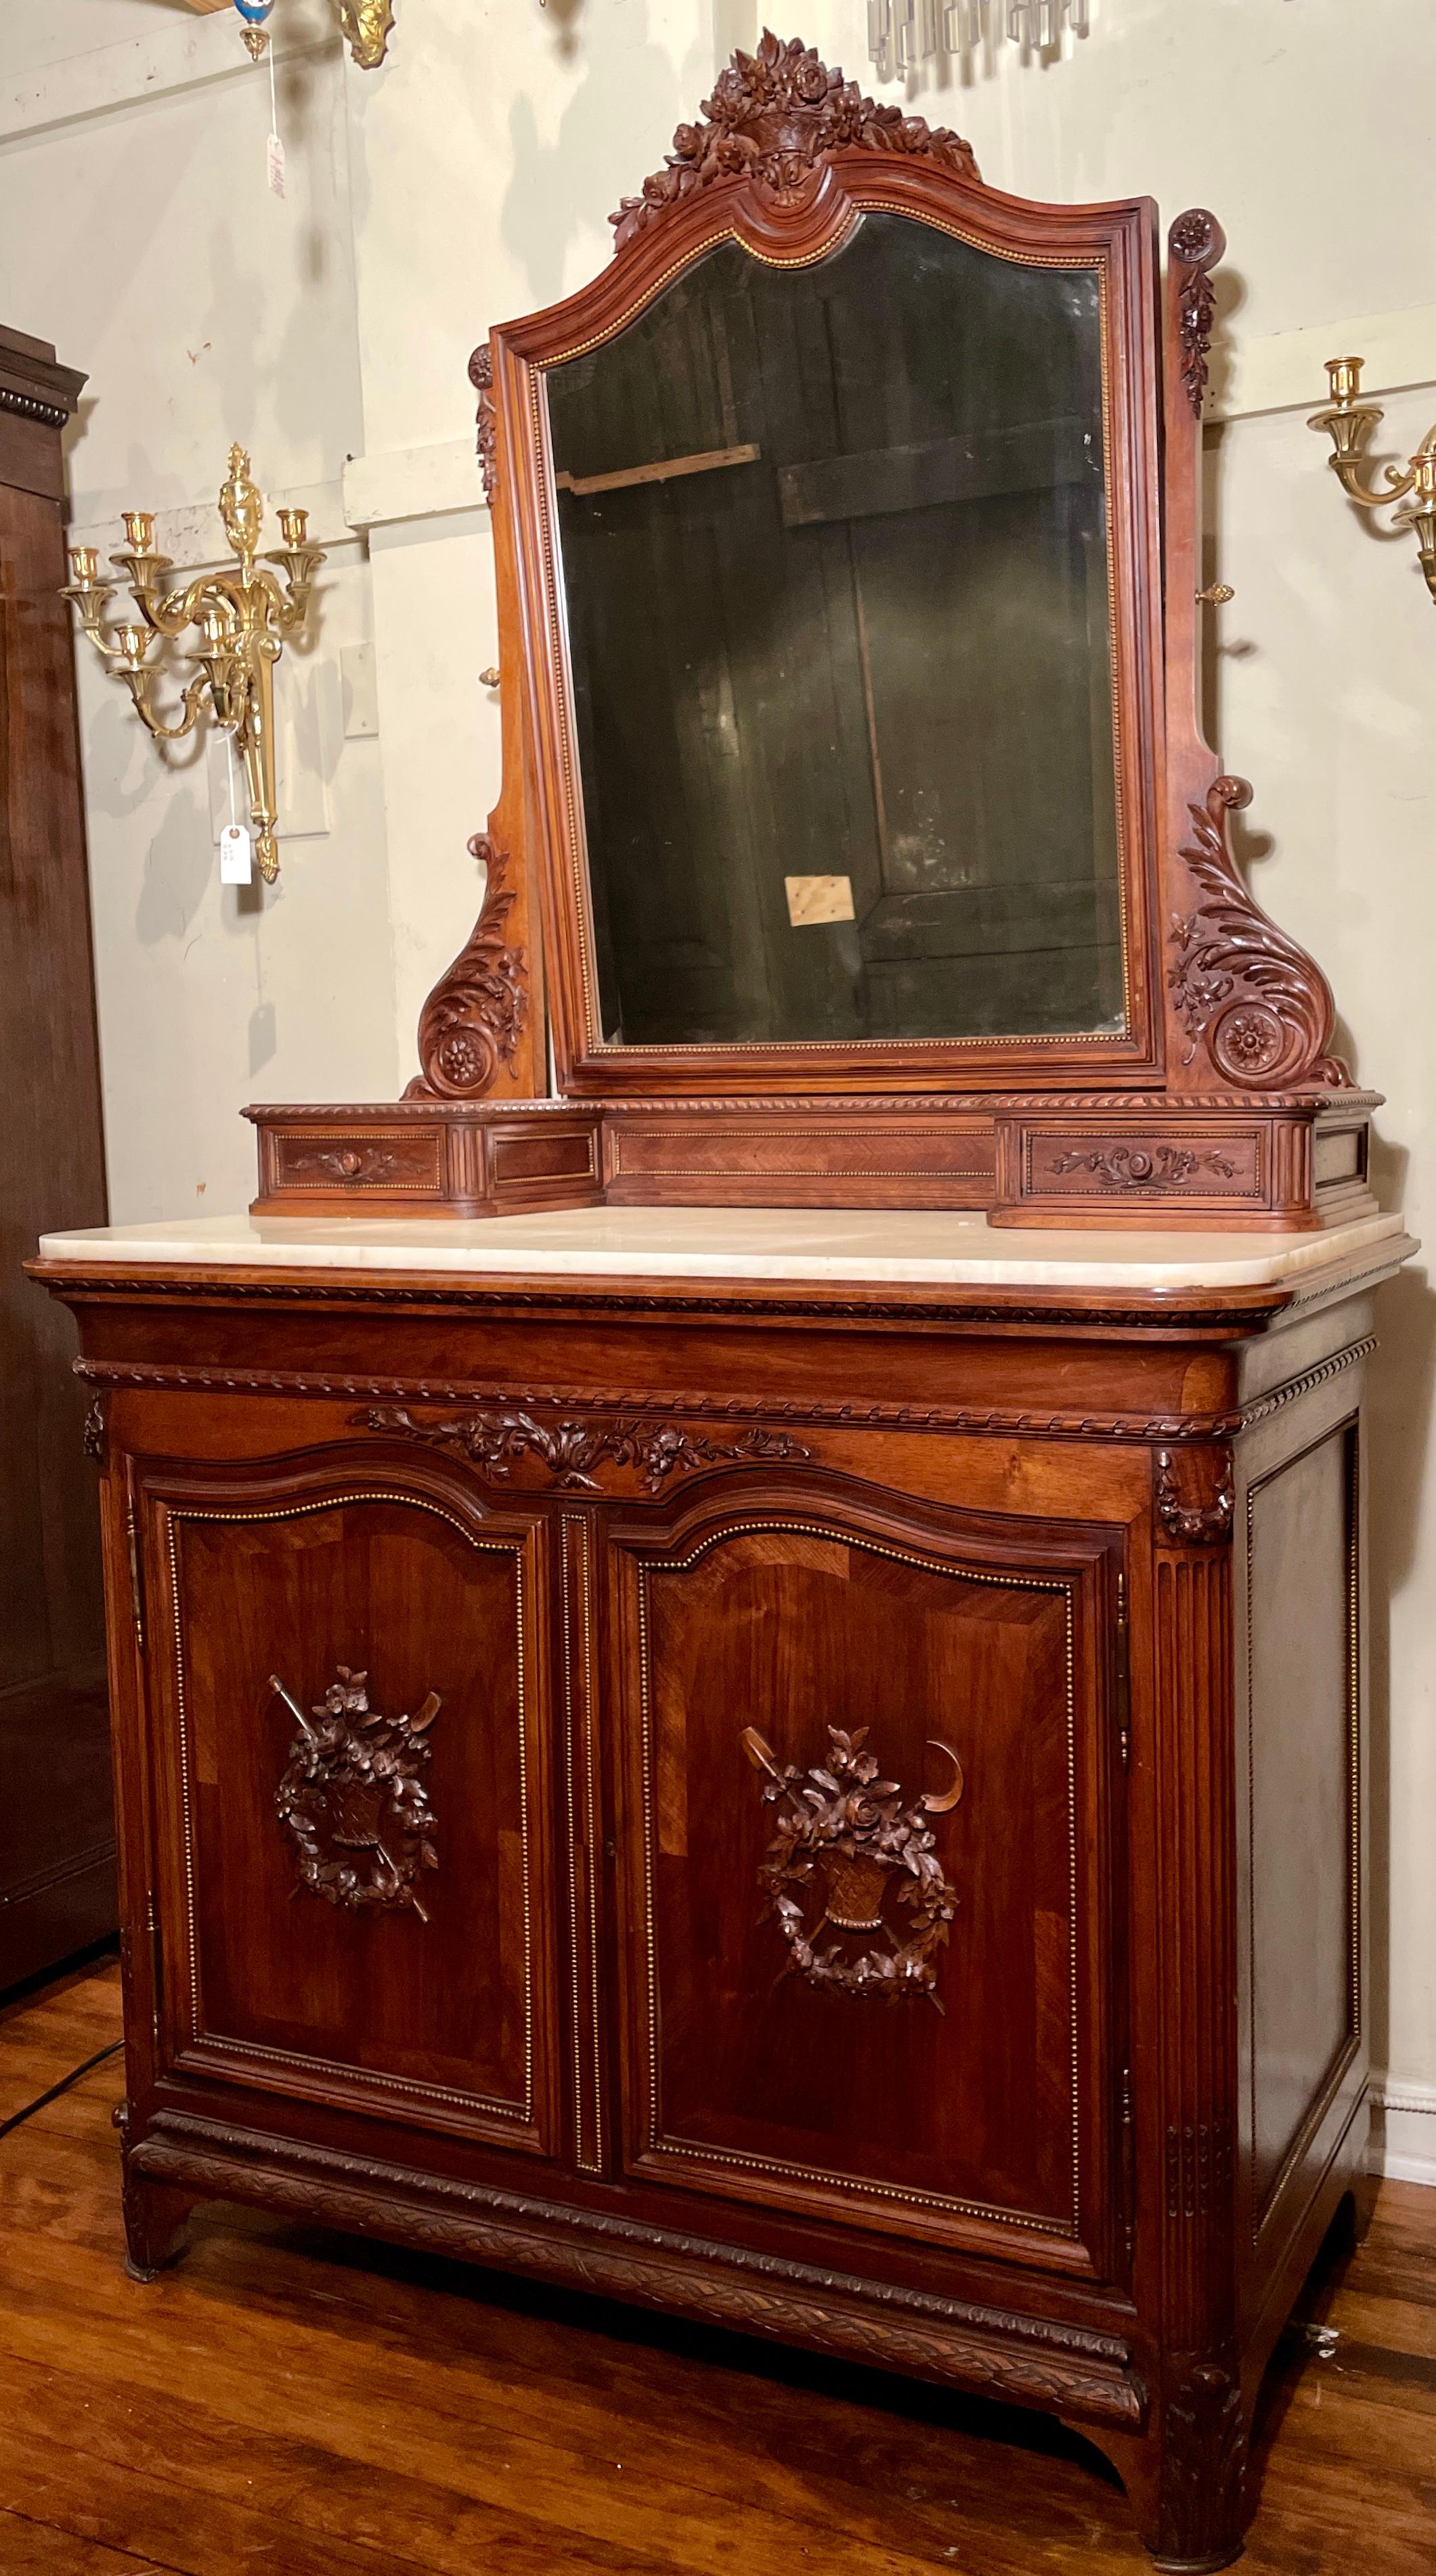 Antique French Louis XVI carved mahogany marble top dresser with mirror, circa 1890.